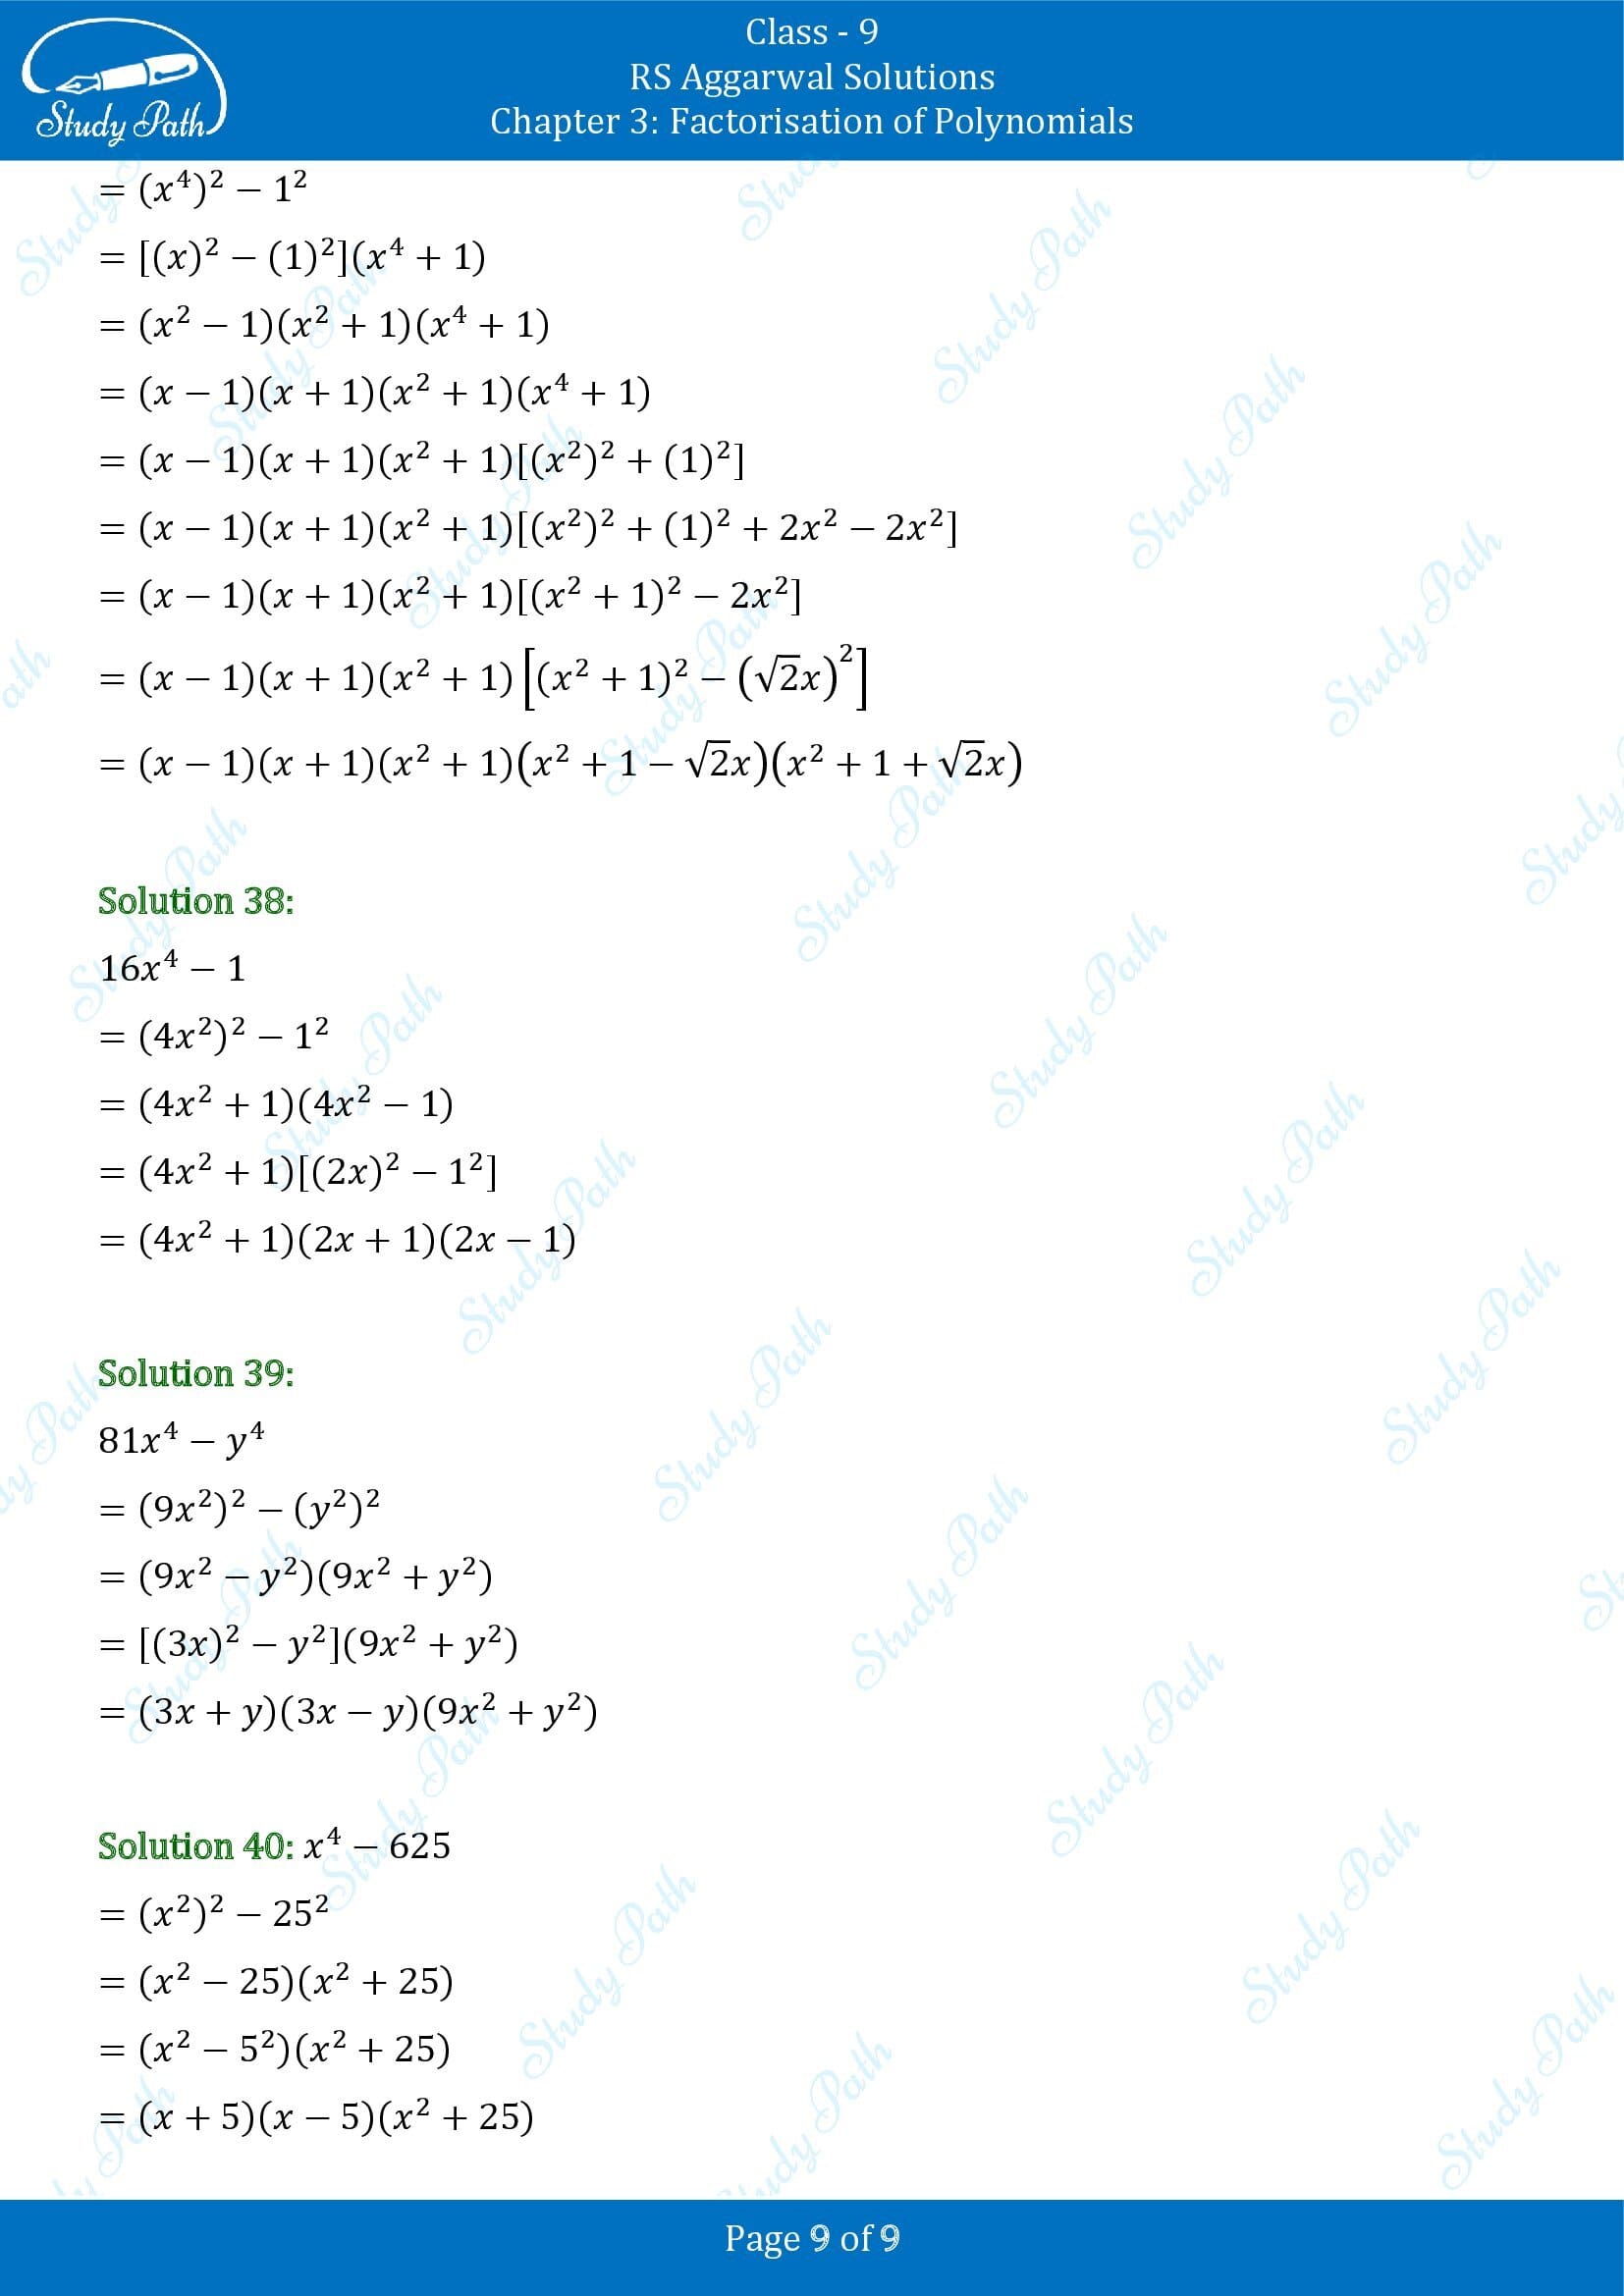 RS Aggarwal Solutions Class 9 Chapter 3 Factorisation of Polynomials Exercise 3B 0009